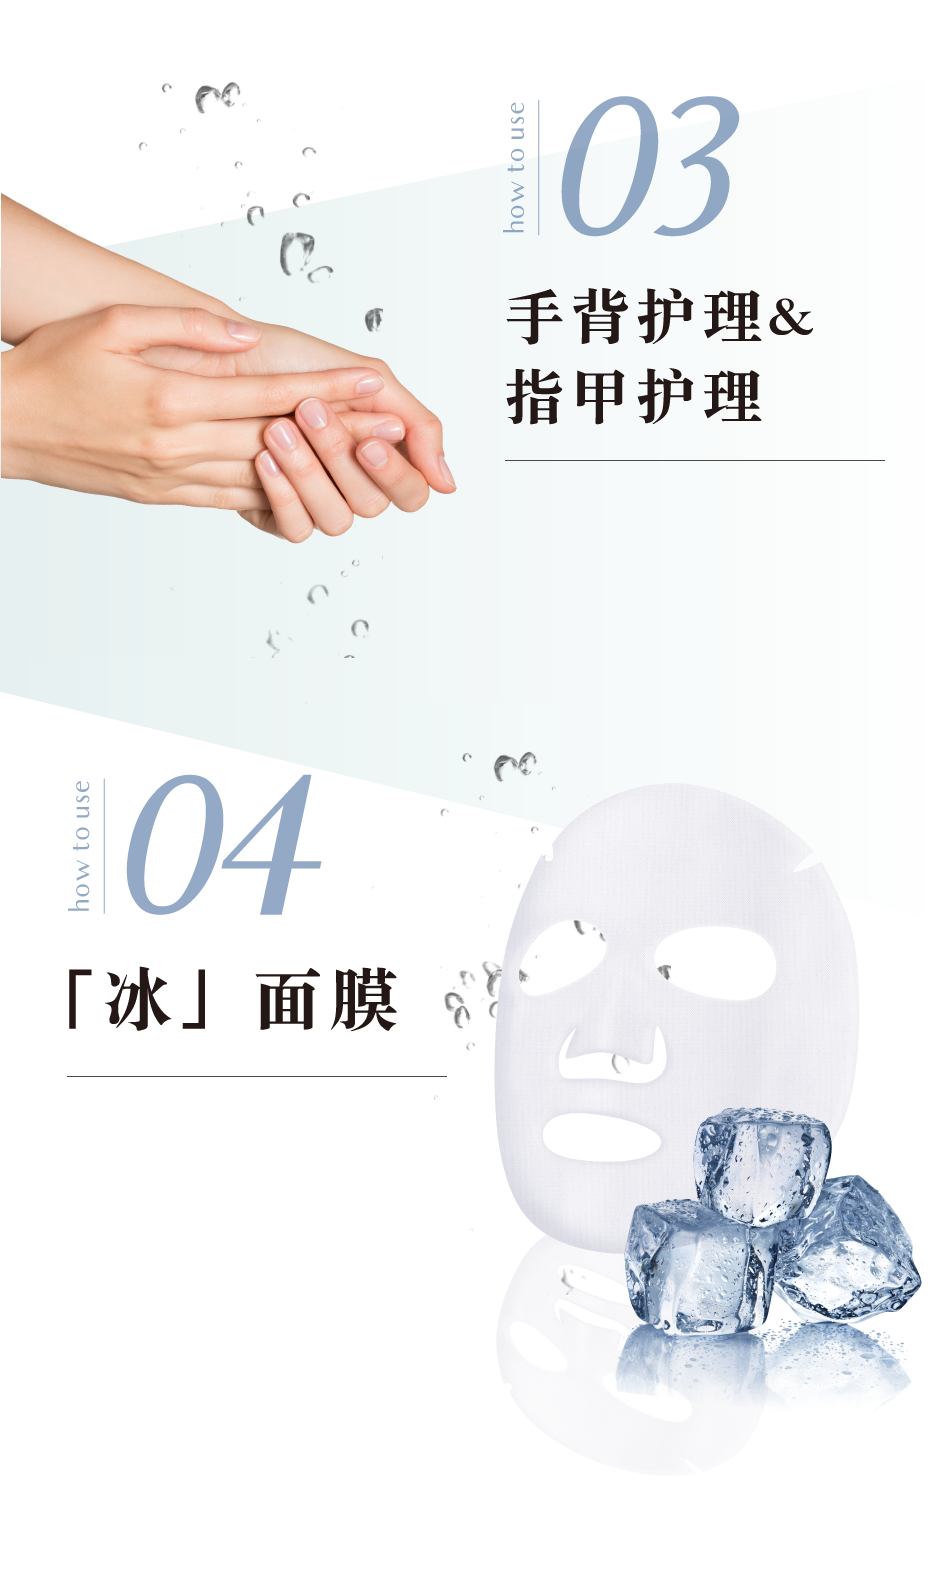 How to use03手背护理&指甲护理How to use04「冰」面膜